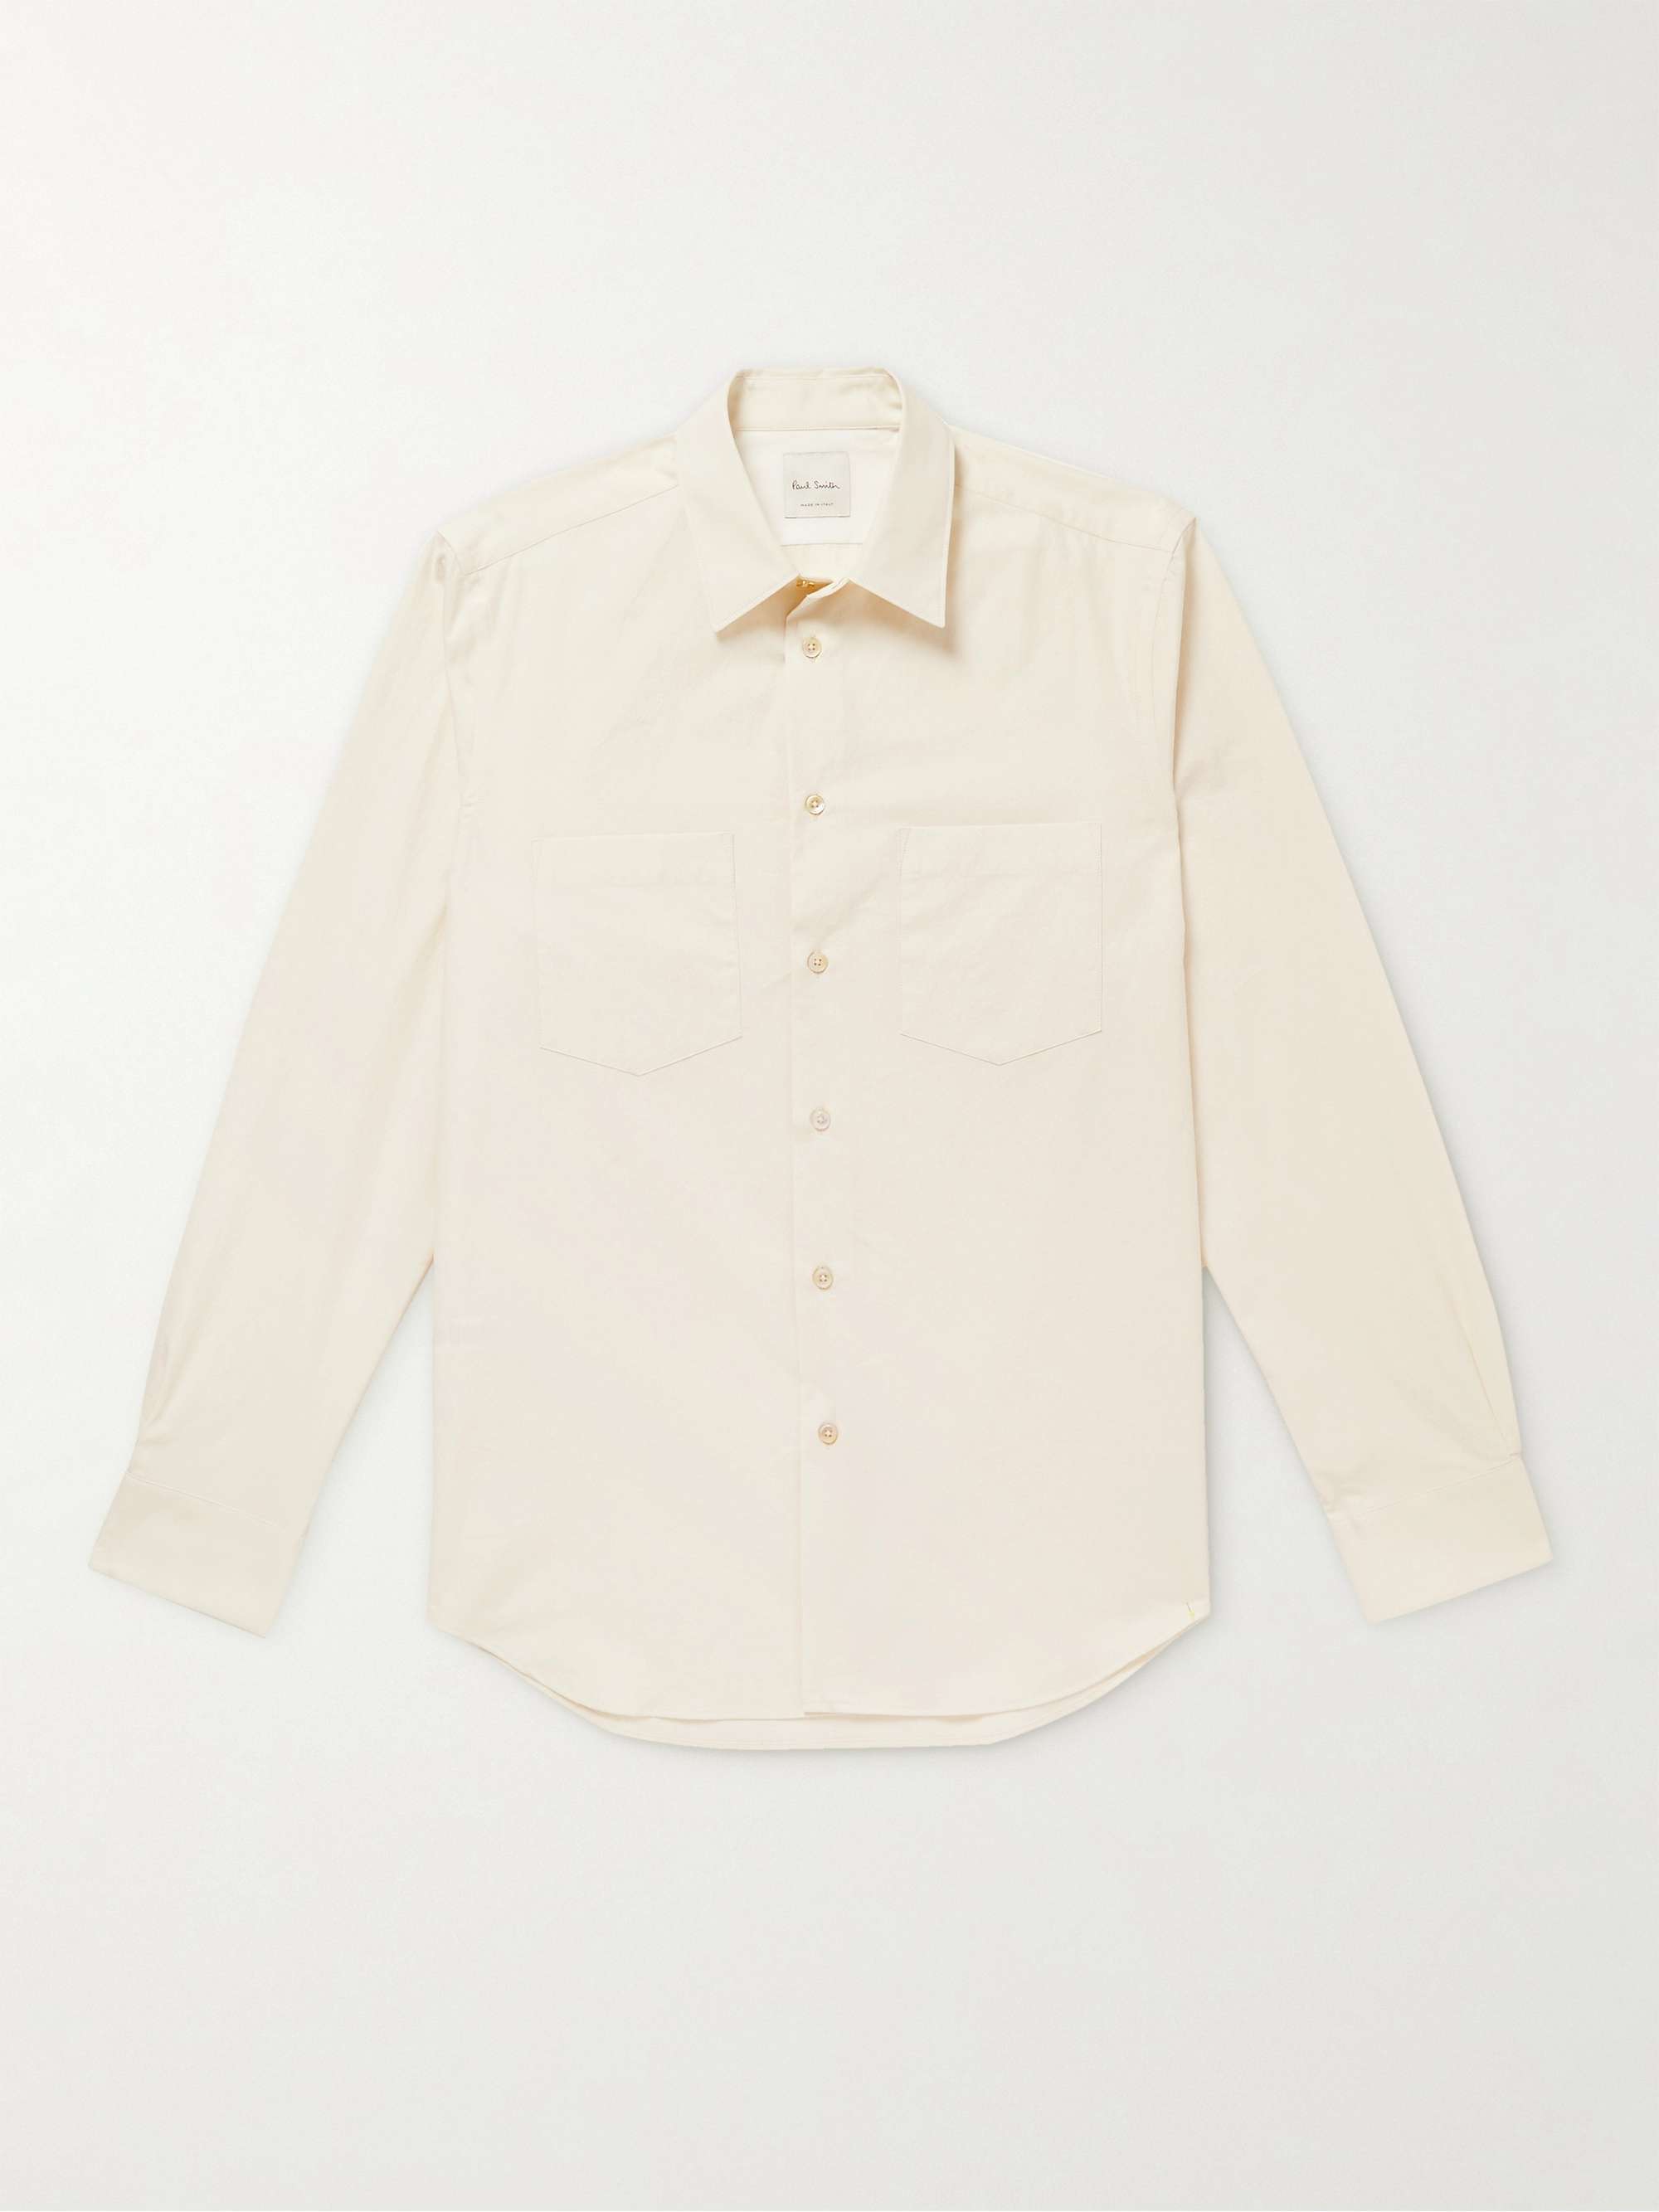 PAUL SMITH Logo-Embroidered Cotton Shirt